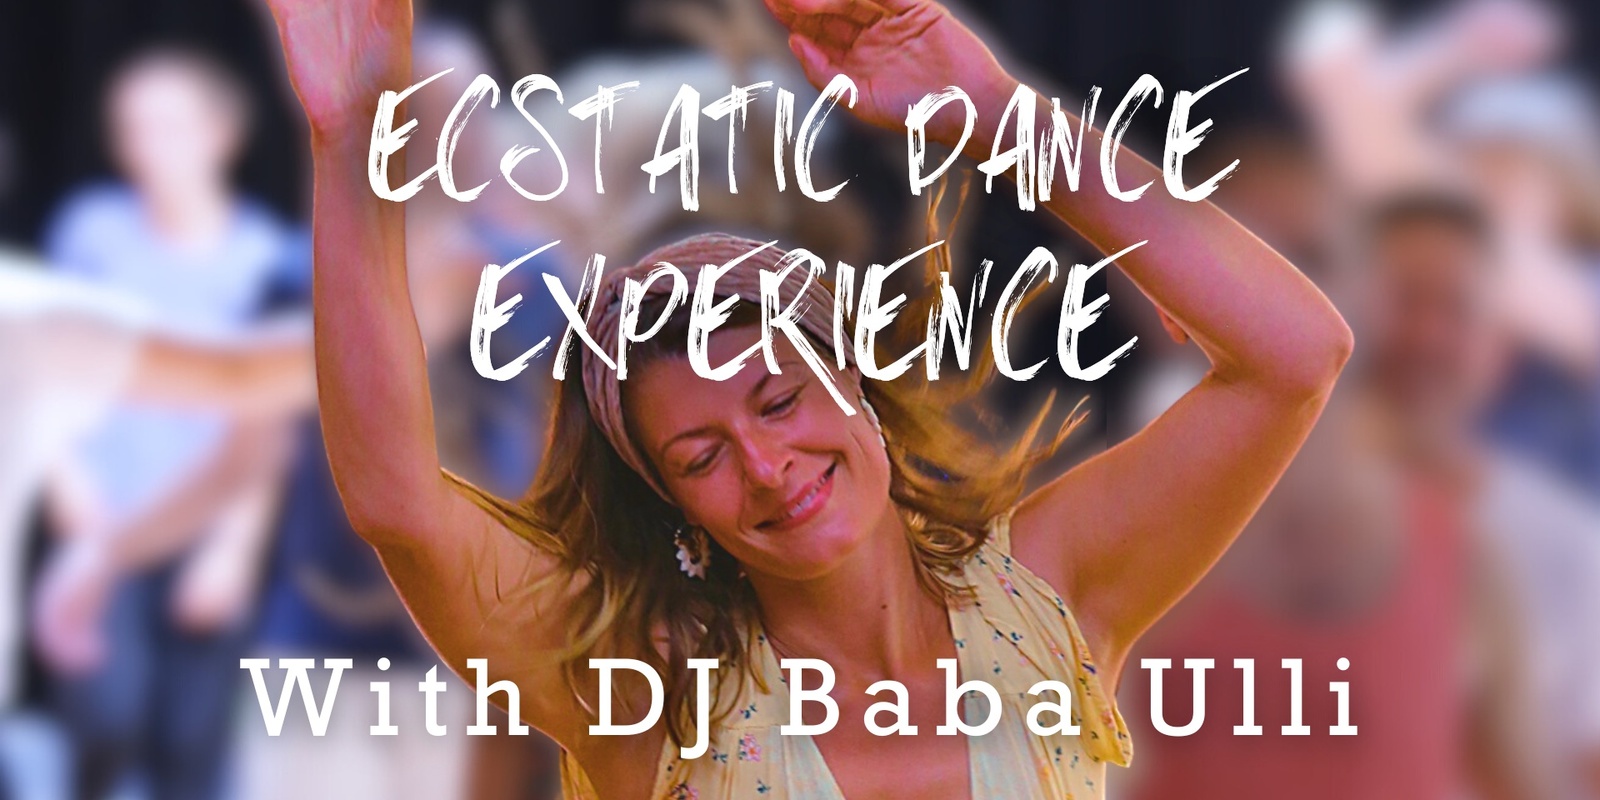 Banner image for Ecstatic Dance Experience with DJ Baba Ulli